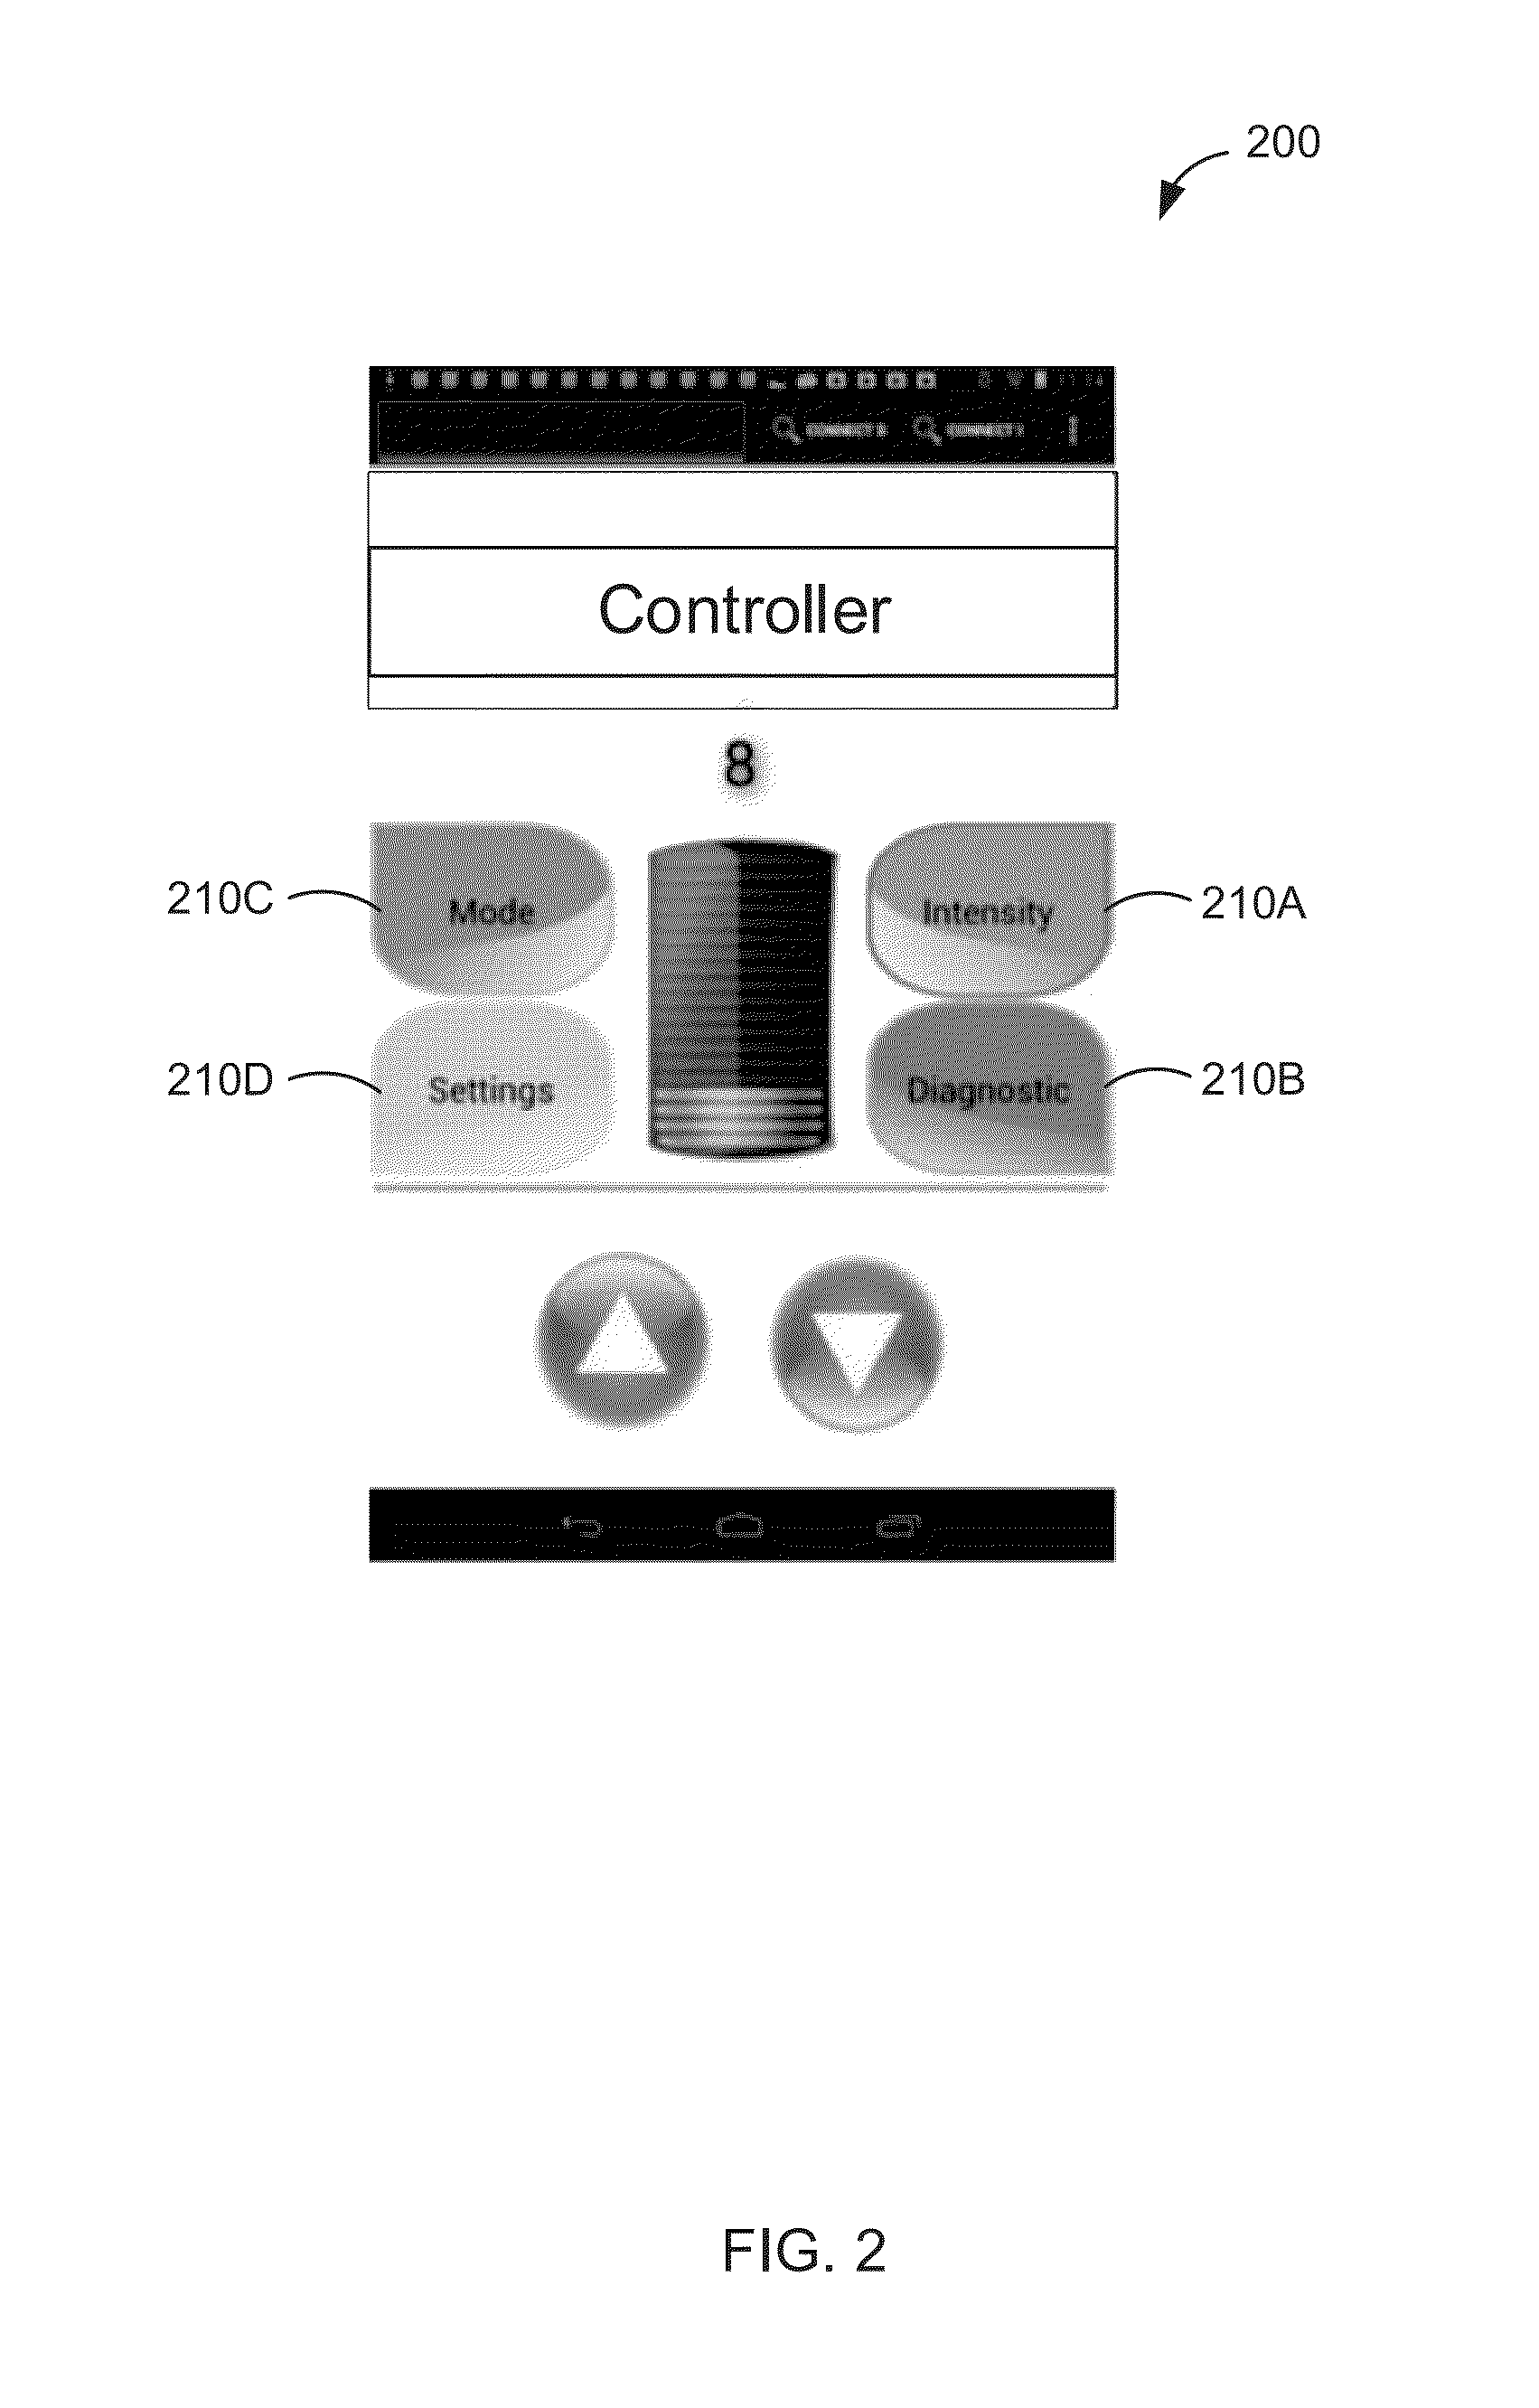 Electrical stimulation for a functional electrical stimulation system